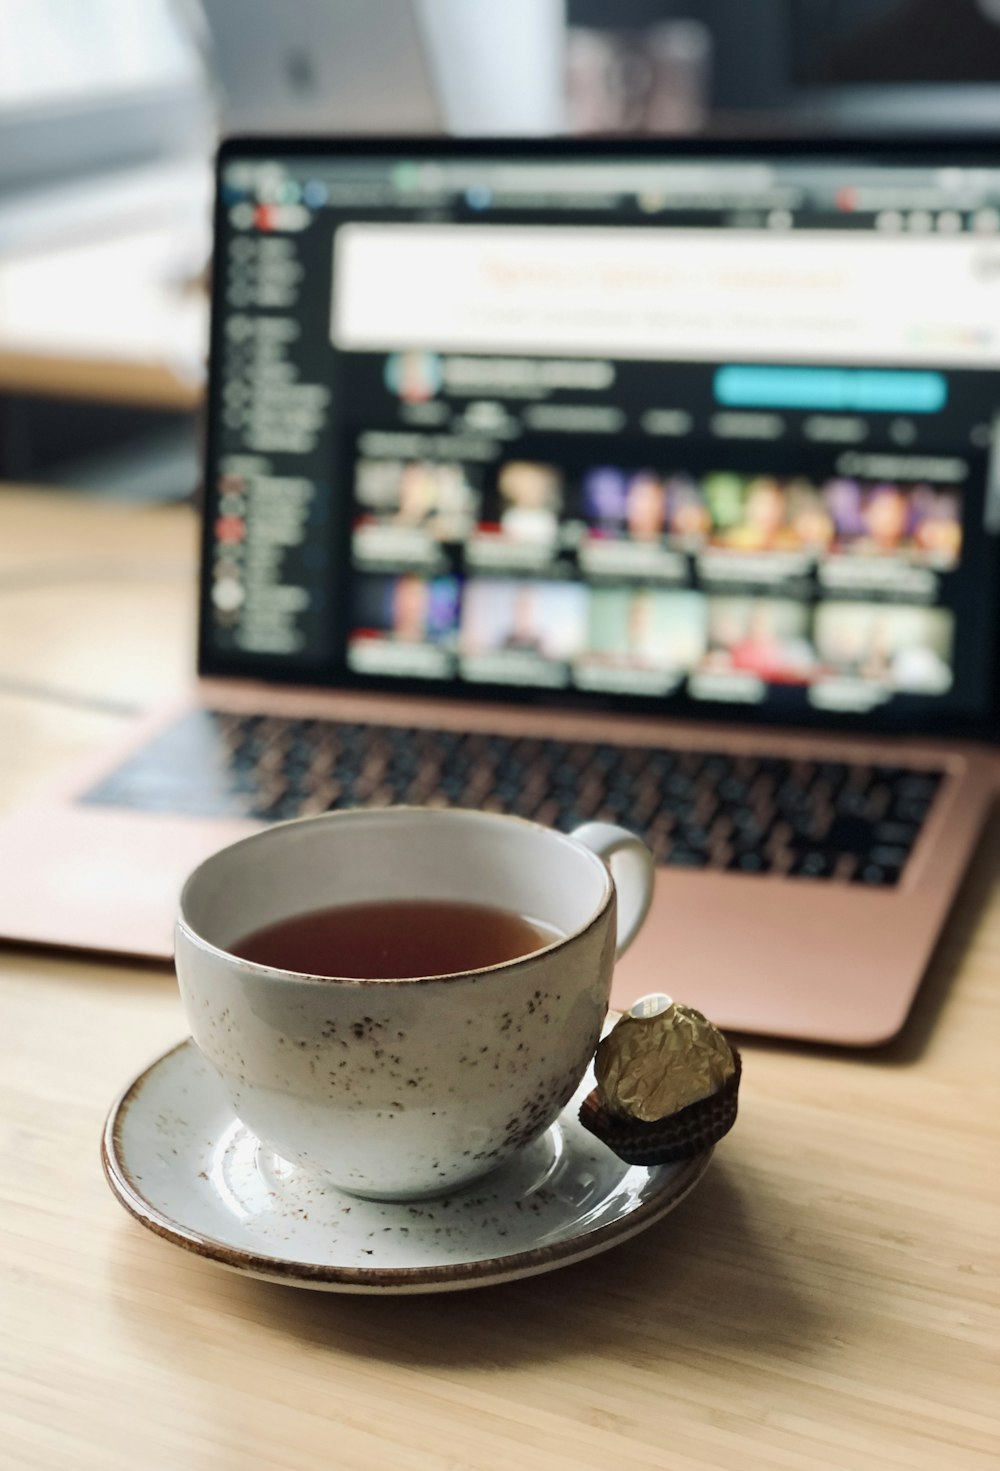 Cup of tea in front of computer monitor, showing YouTube AI features